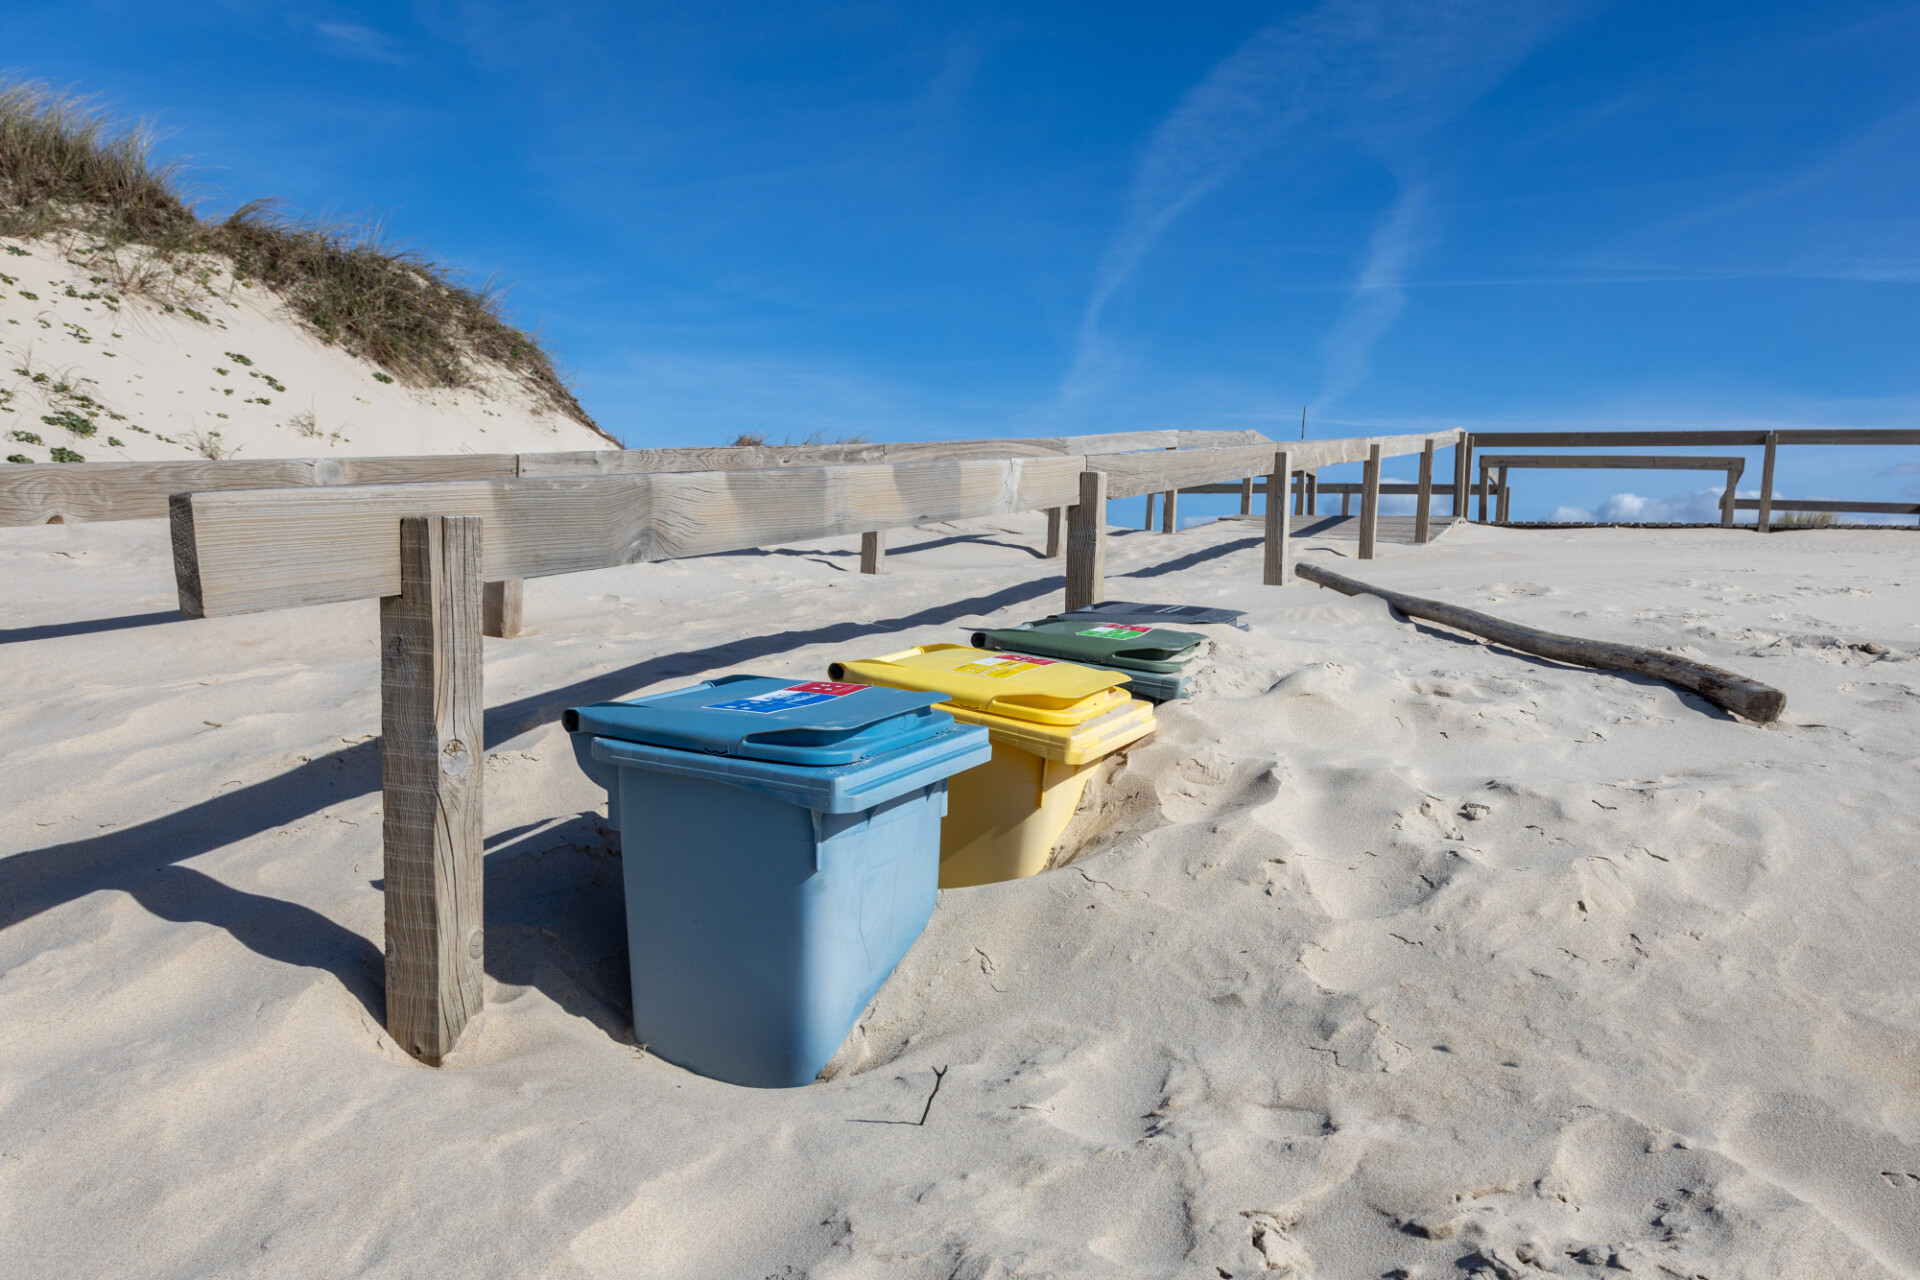 Rubbish bins sink into the sand dunes on the beach